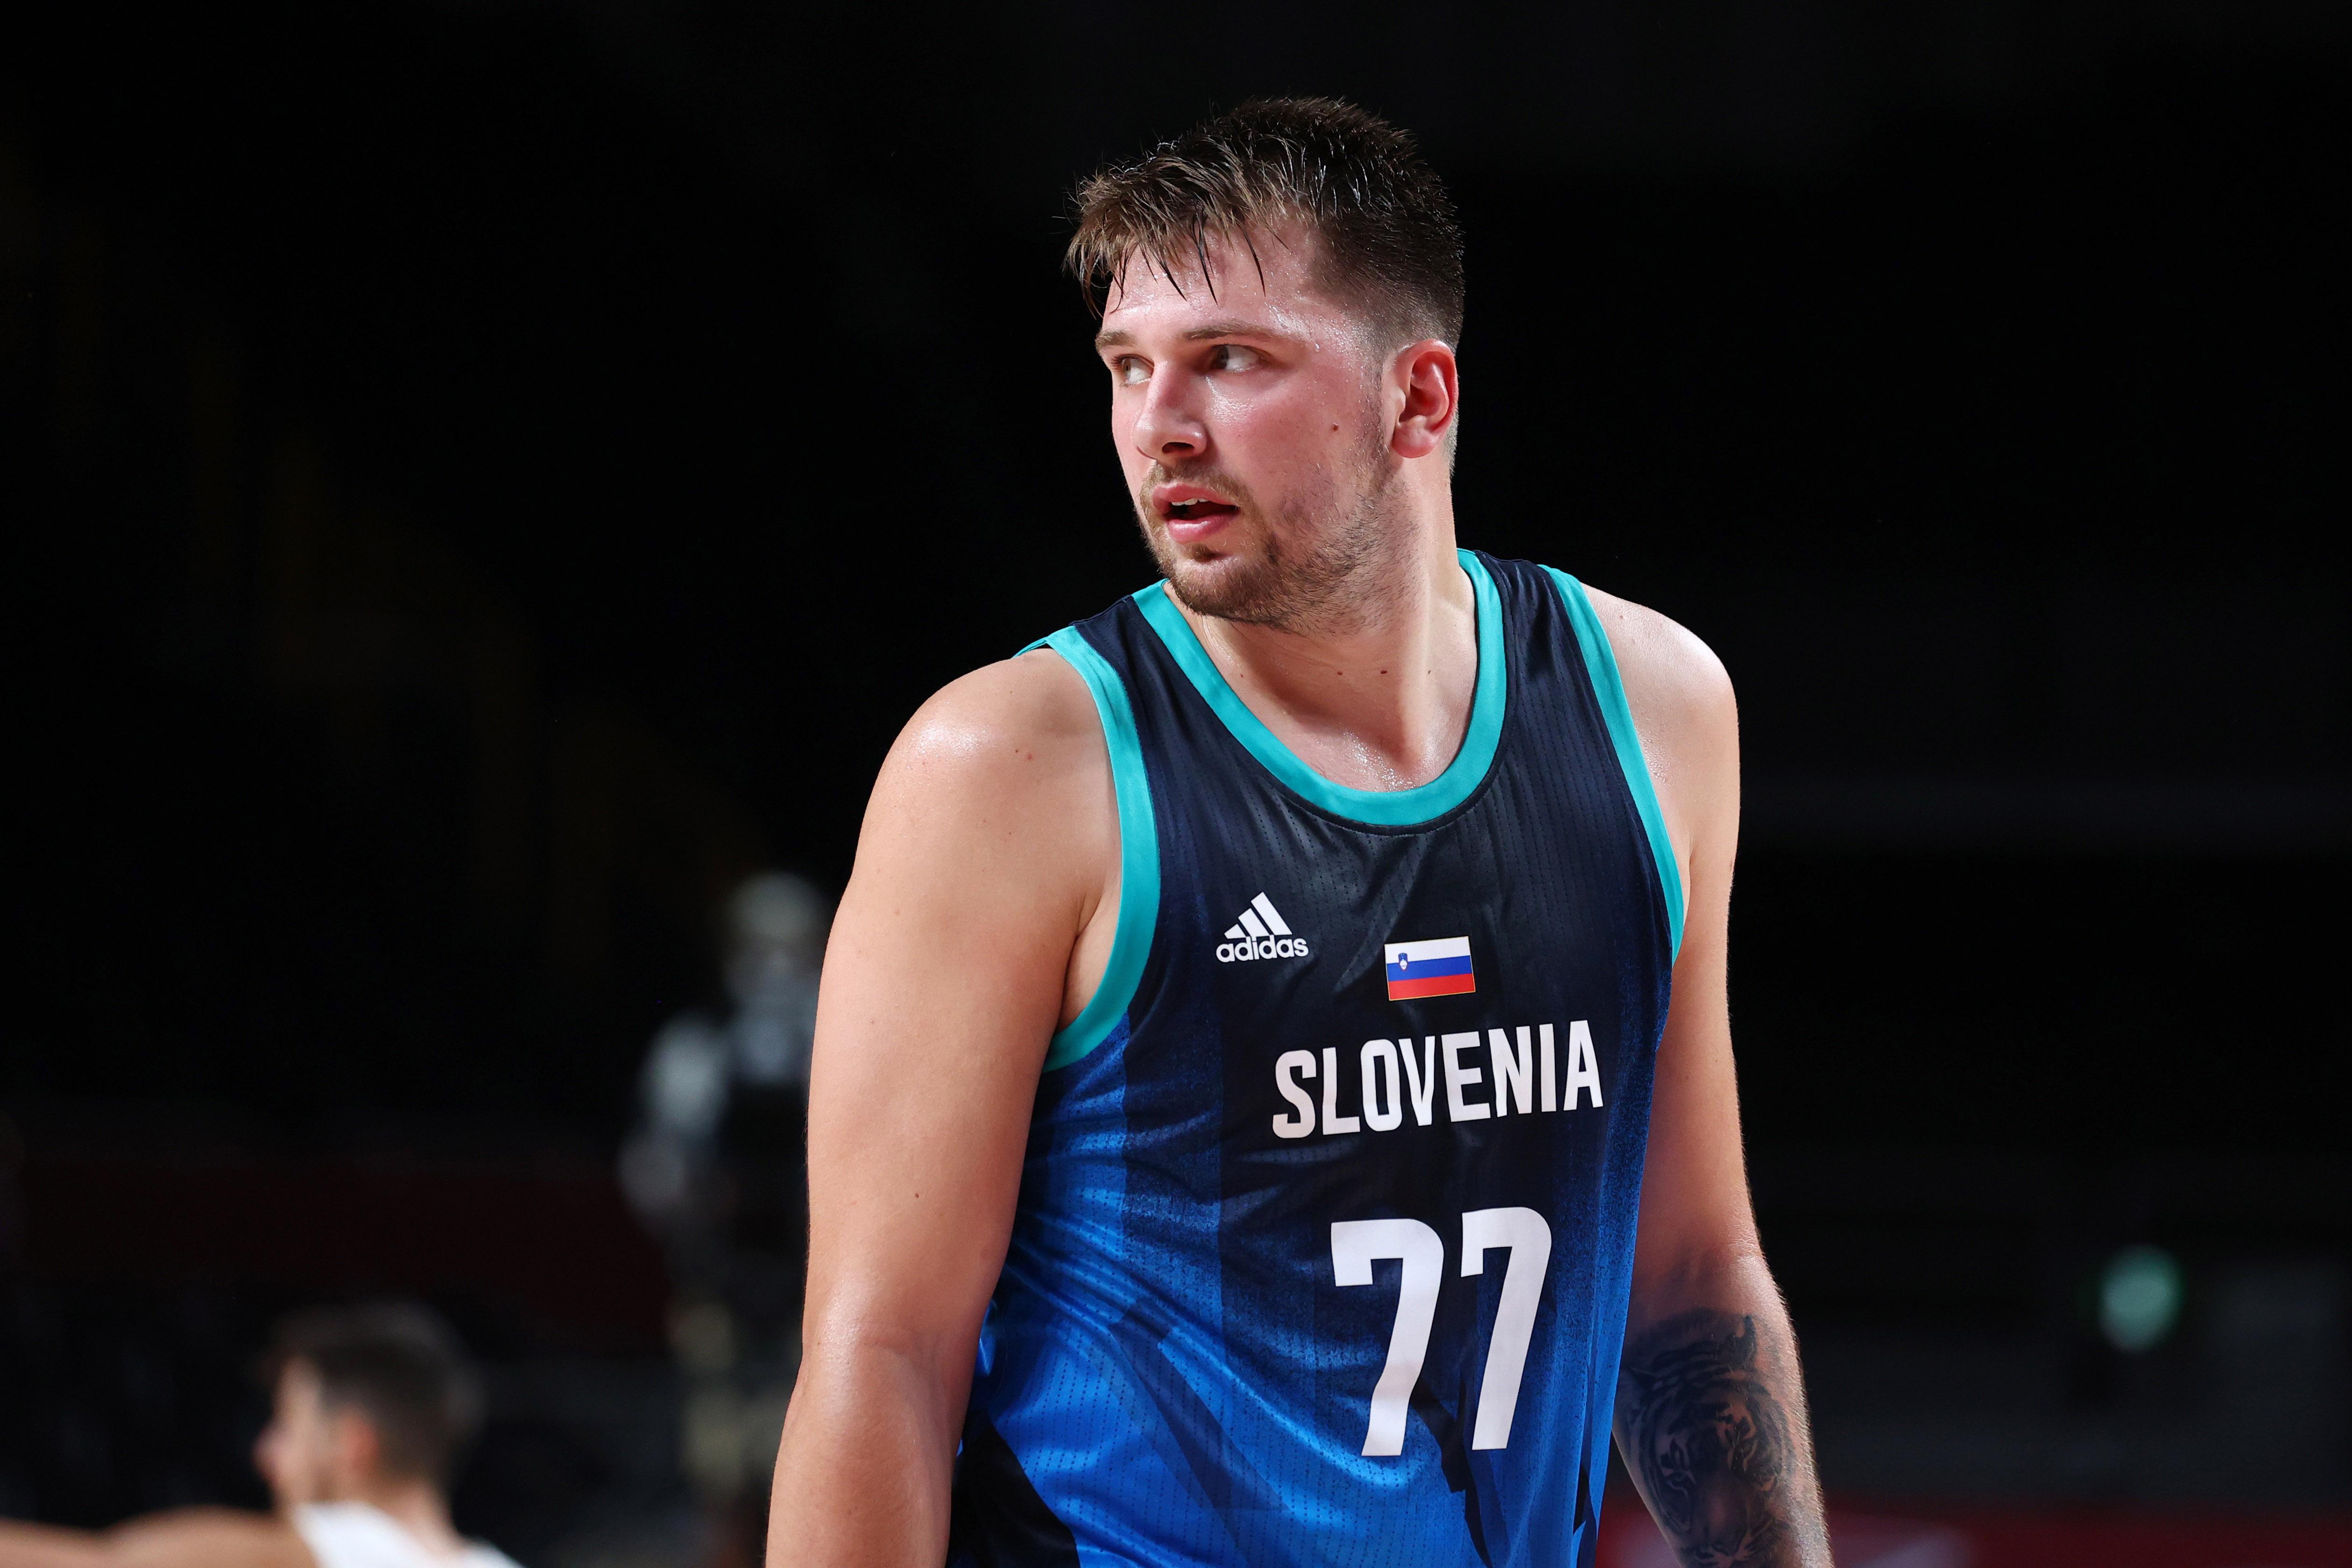 Olympics: Check Out The Photo Luka Doncic Tweeted After Slovenia